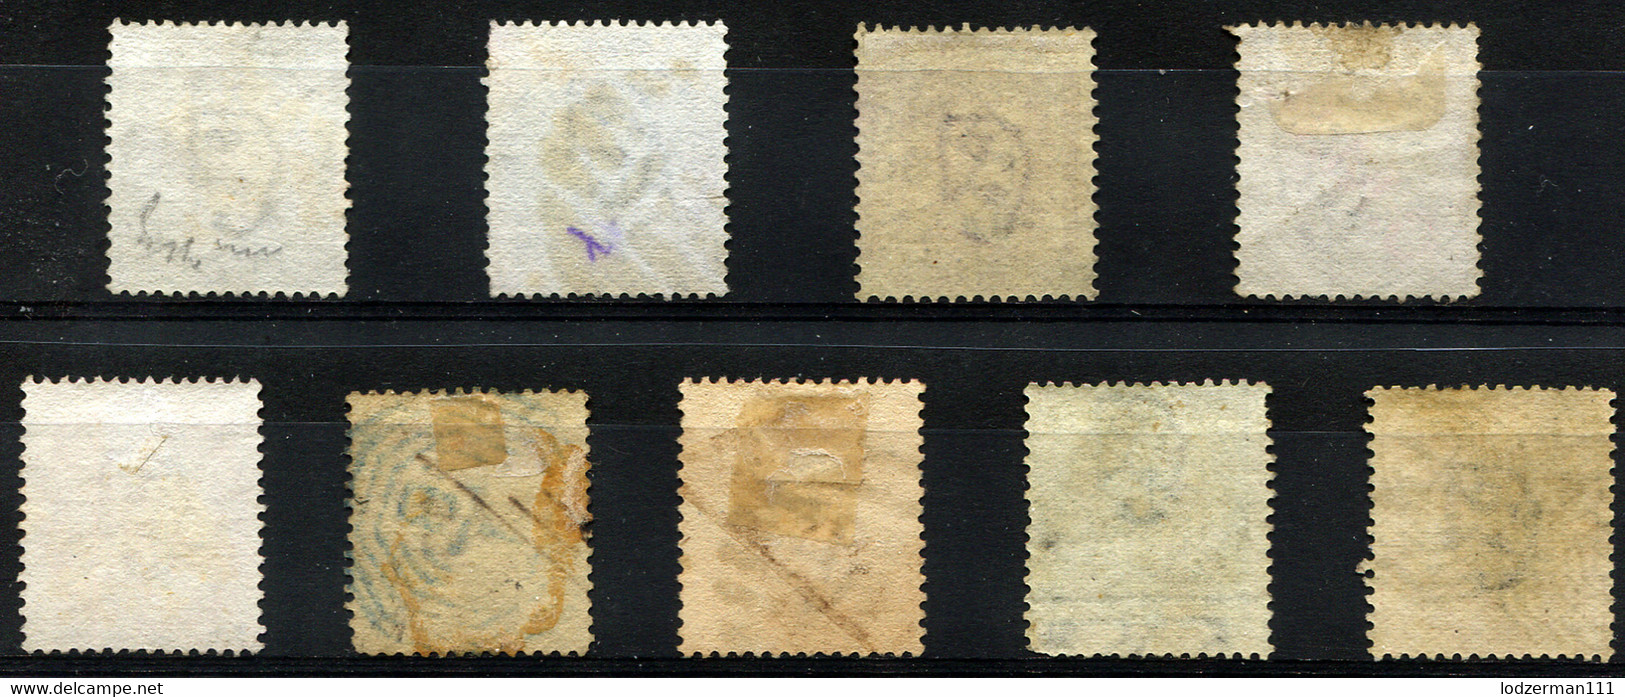 INDIA 1865-73 Wmk Perf.14 - Mi.17-22 Incl. Shades, Types (all F-VF) - 1858-79 Crown Colony